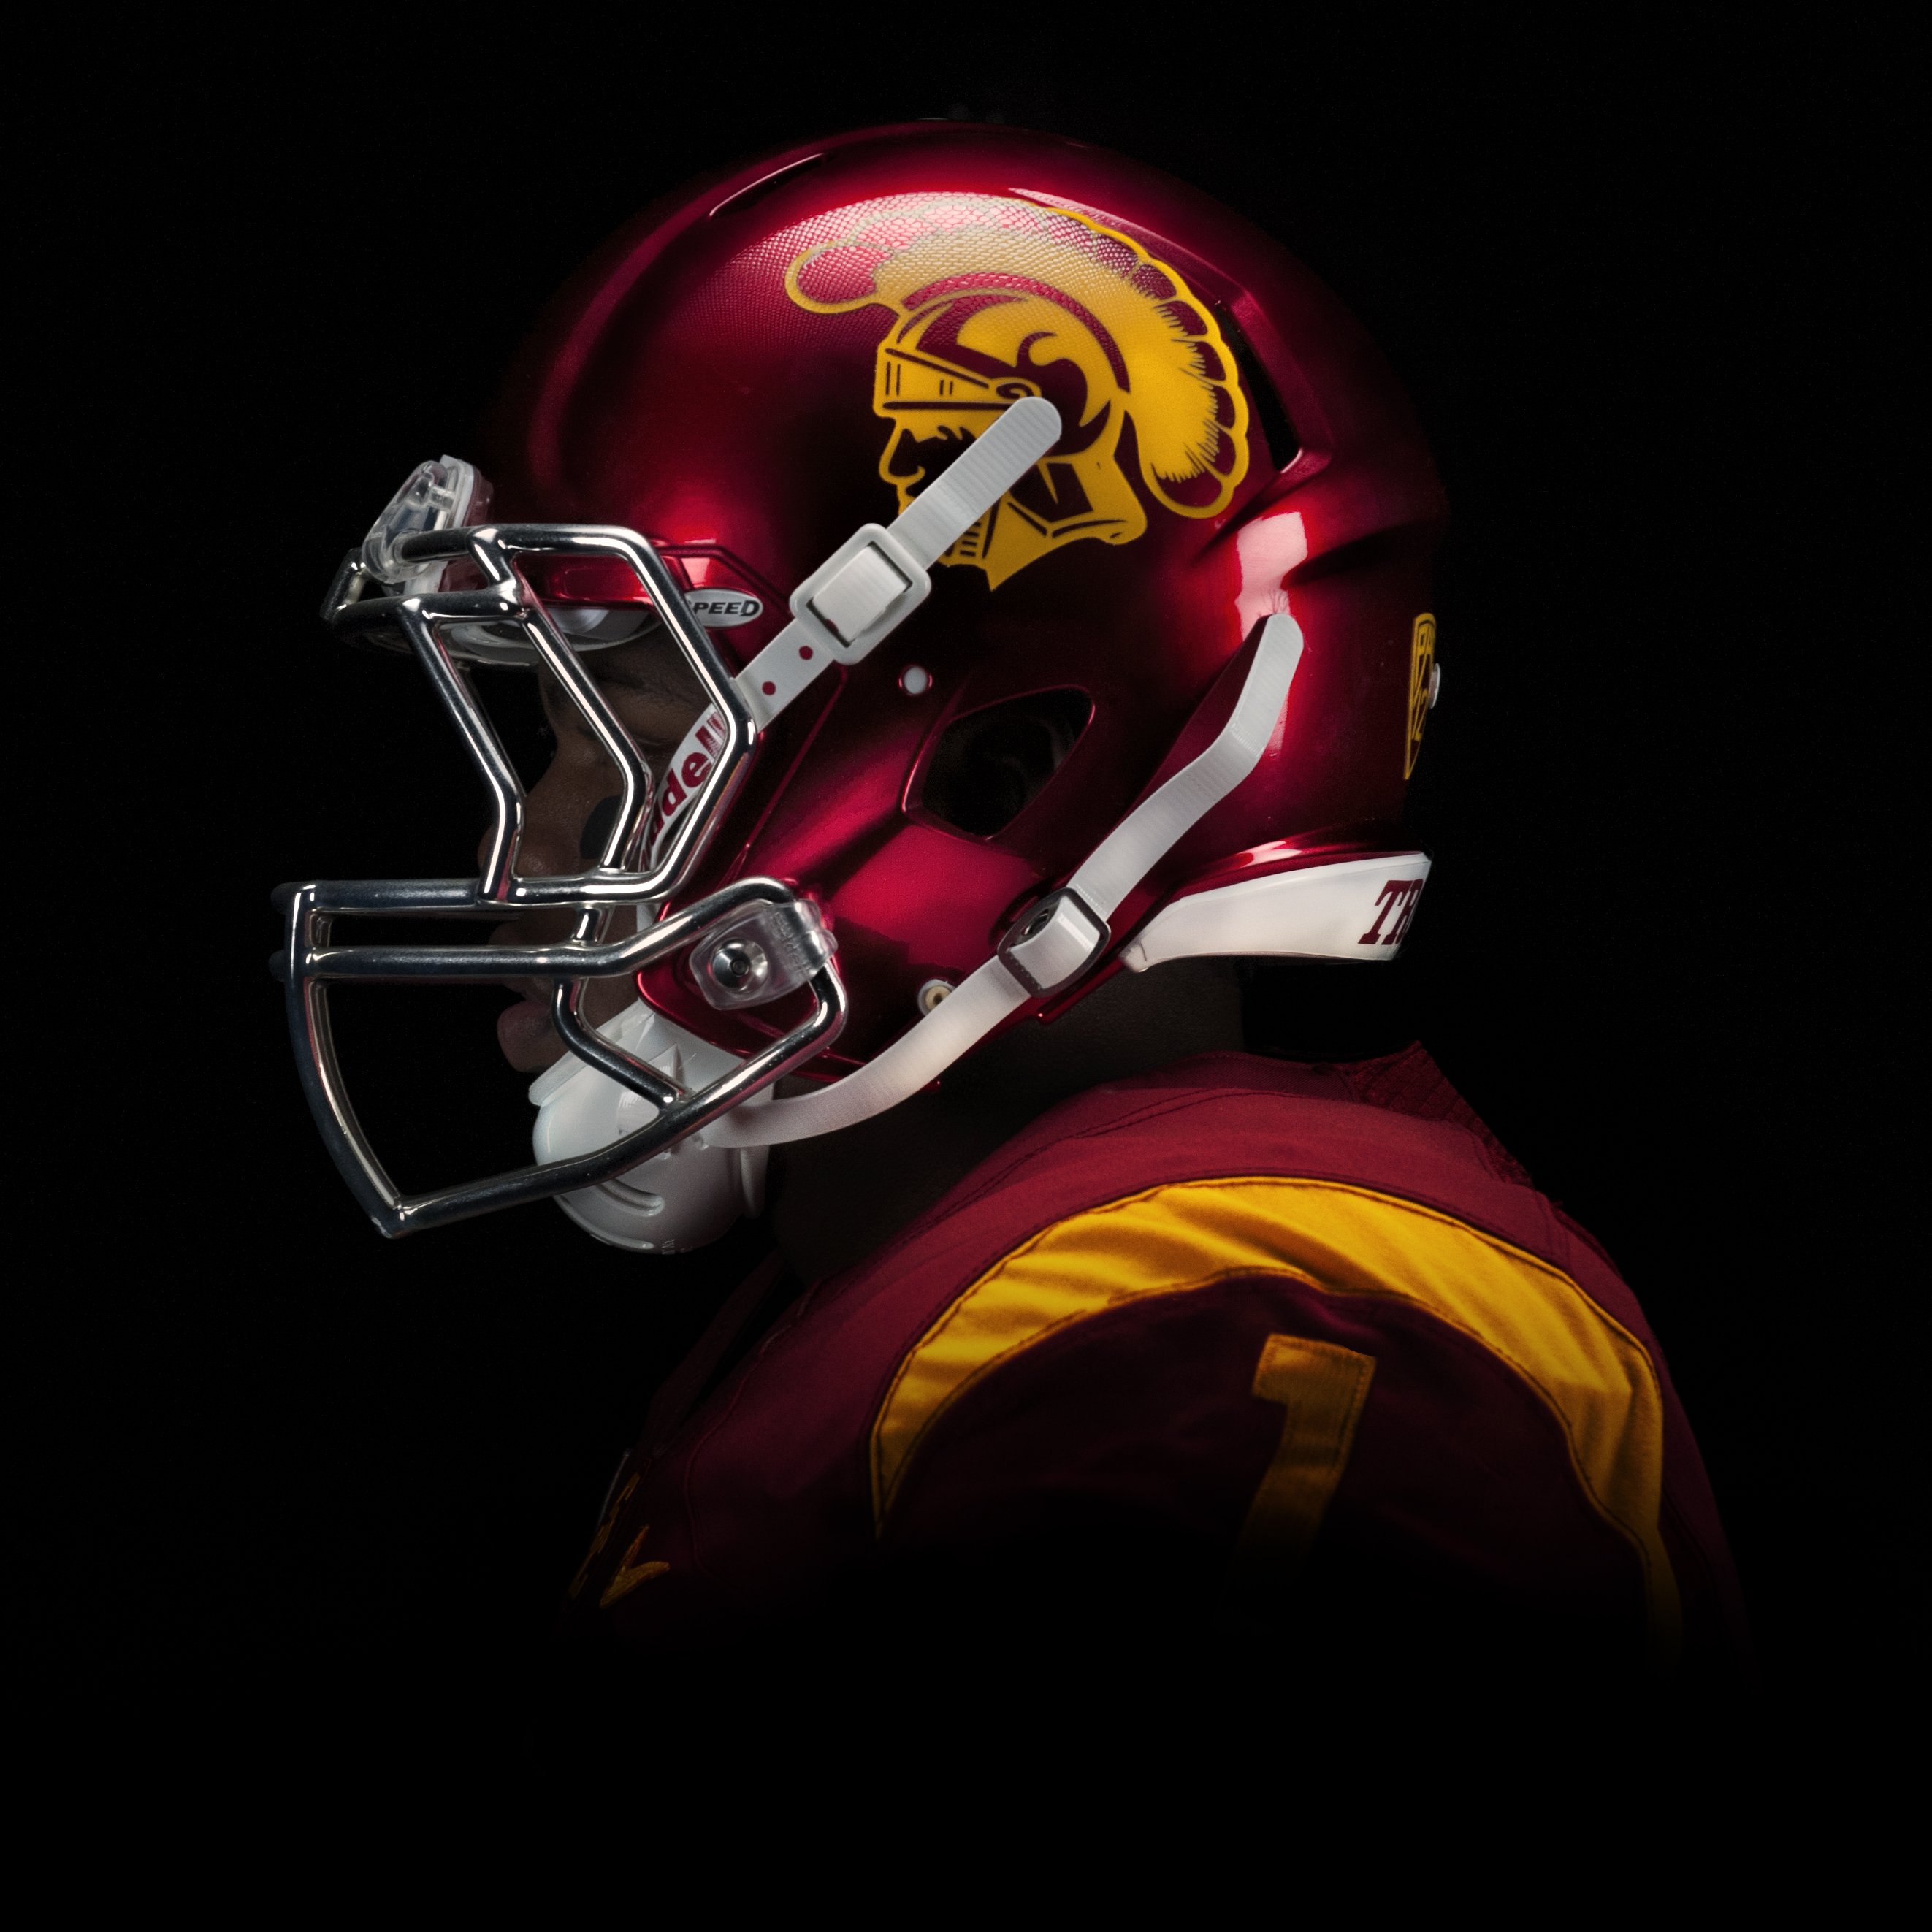 Usc Wallpapers